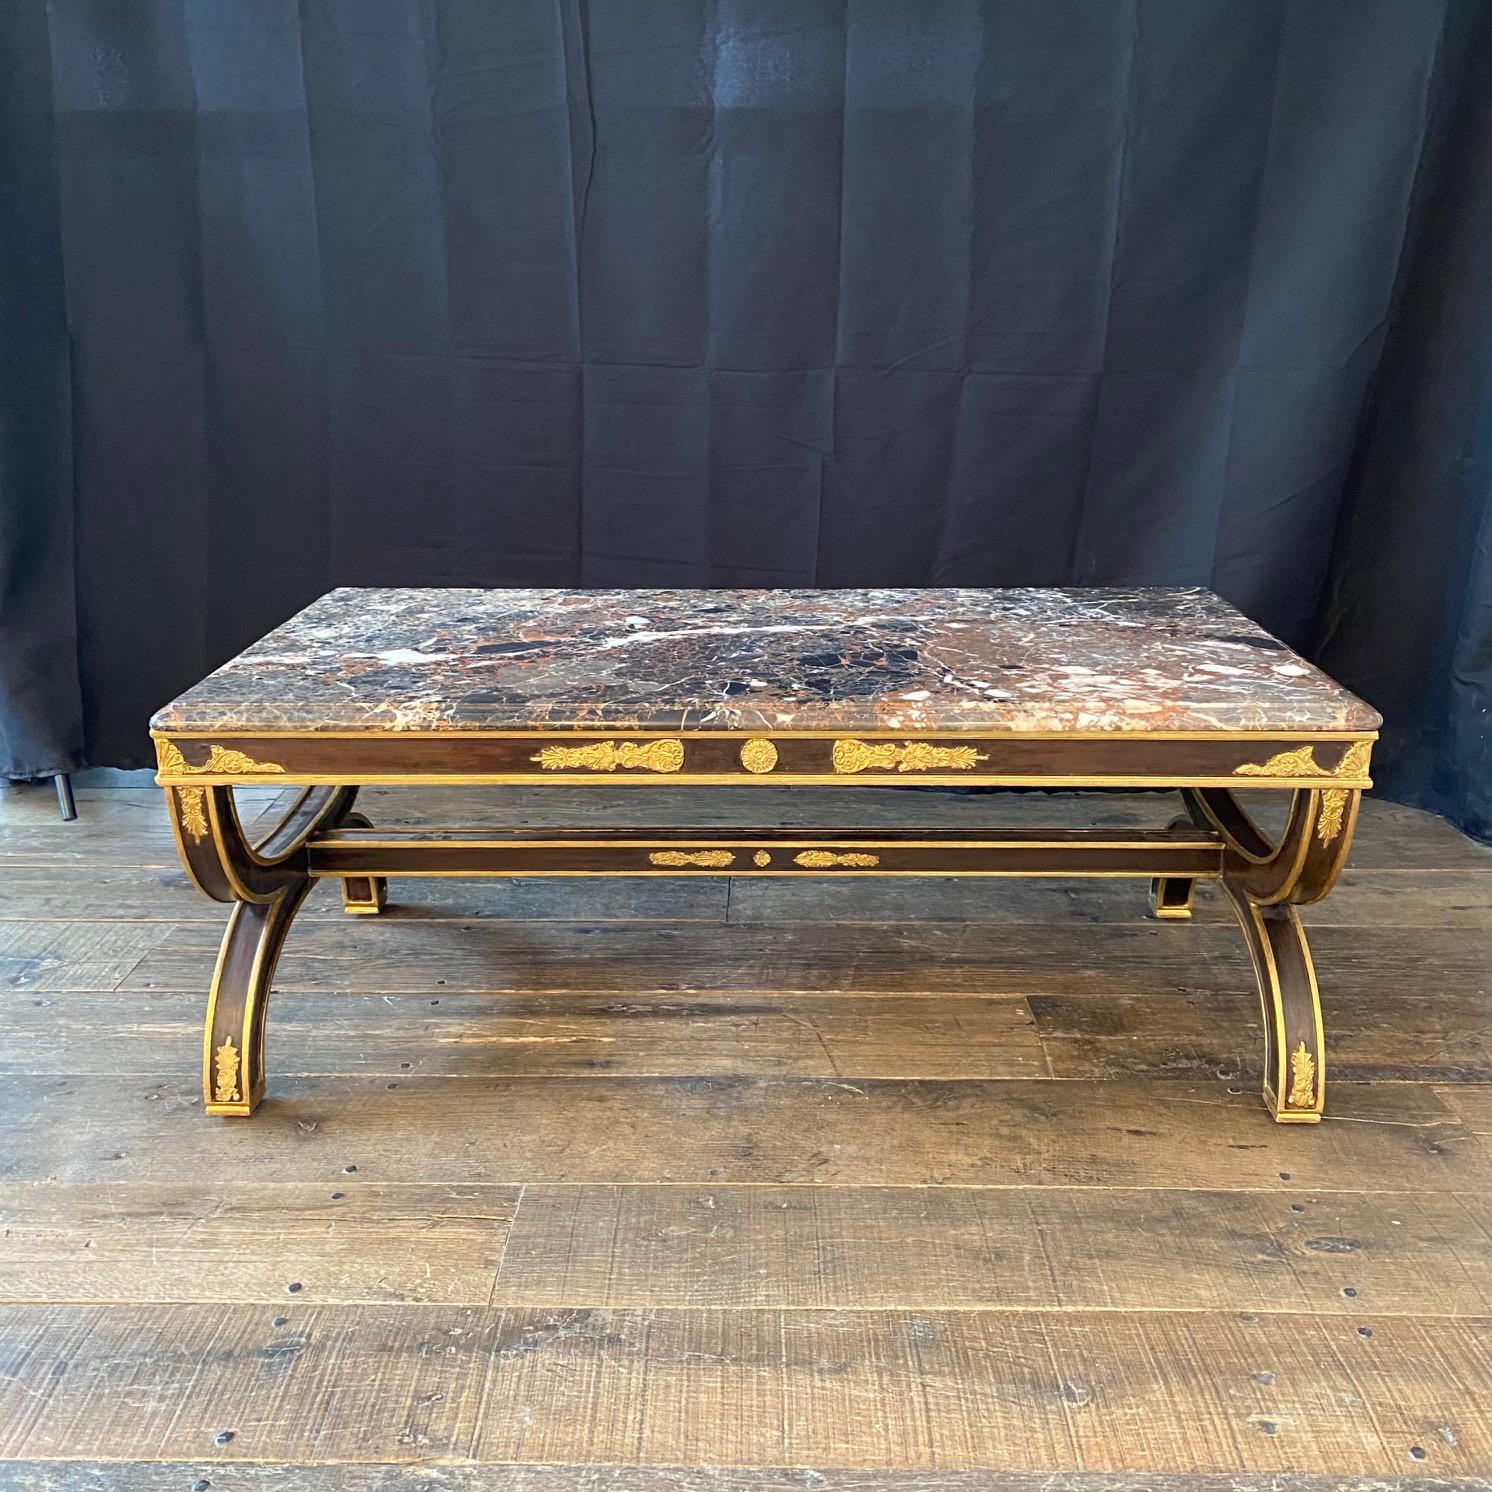 Early 20th Century Elegant French Antique Neoclassical Ebony and Gold Gilt Marble Top Coffee Table  For Sale